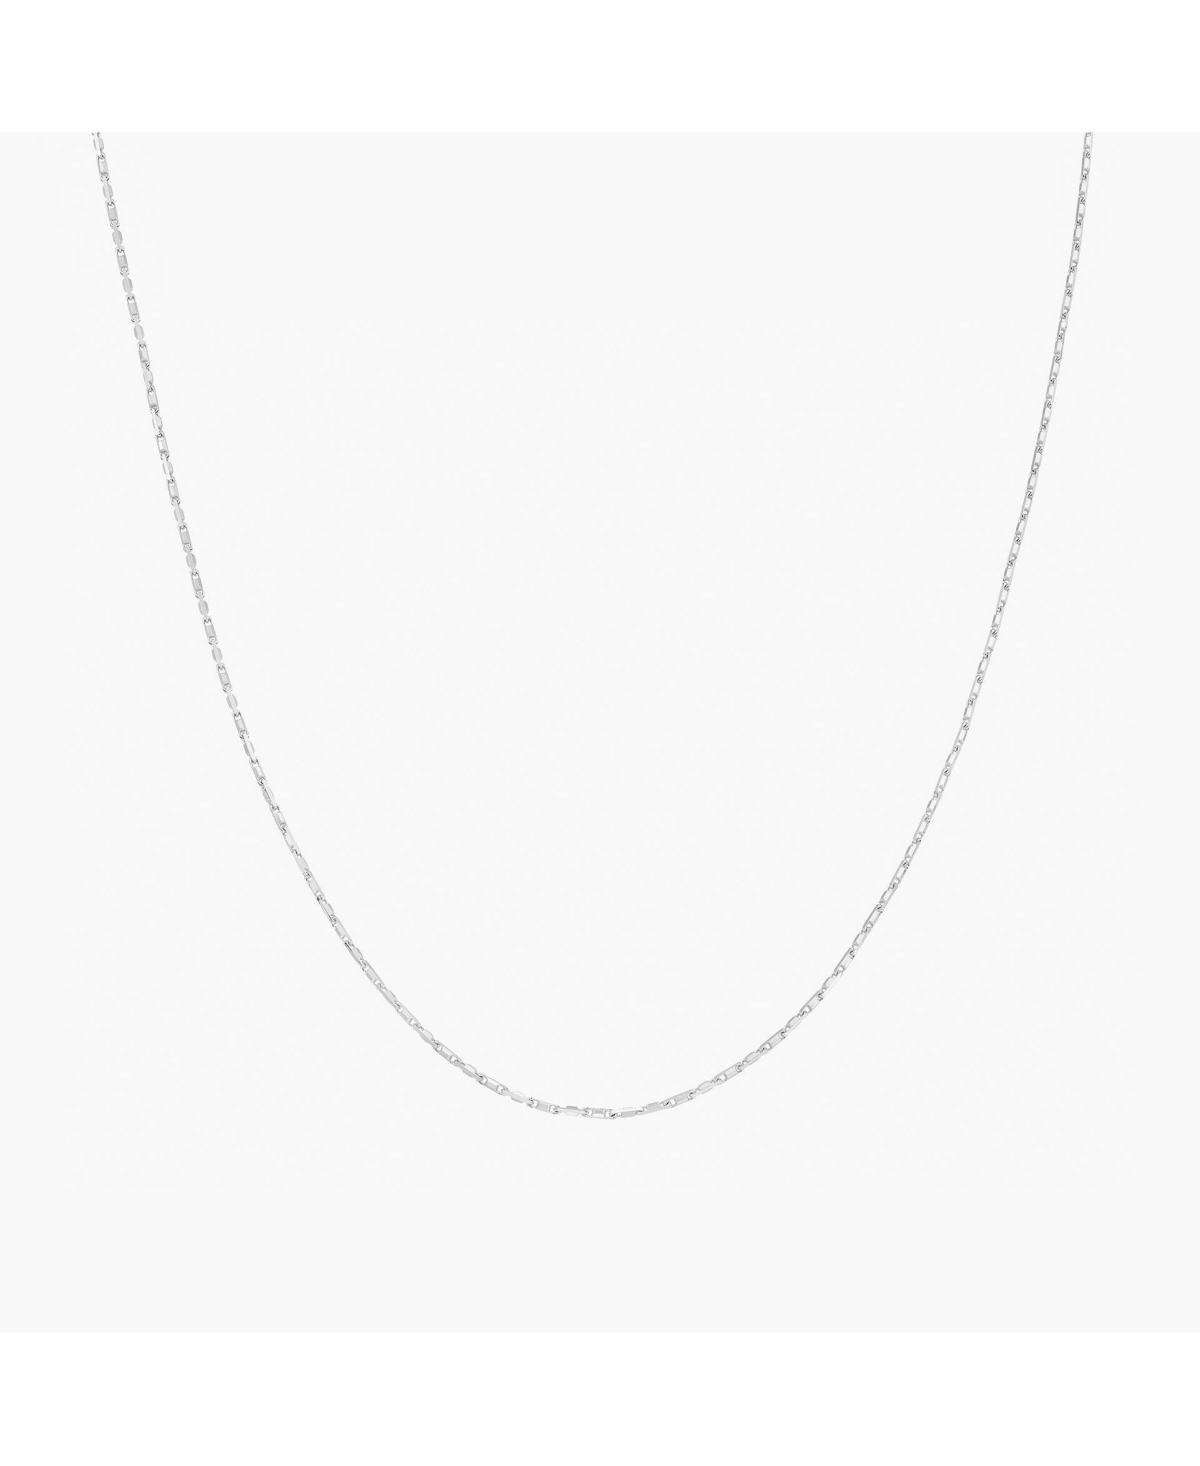 Sharon Basic Chain Necklace - Silver